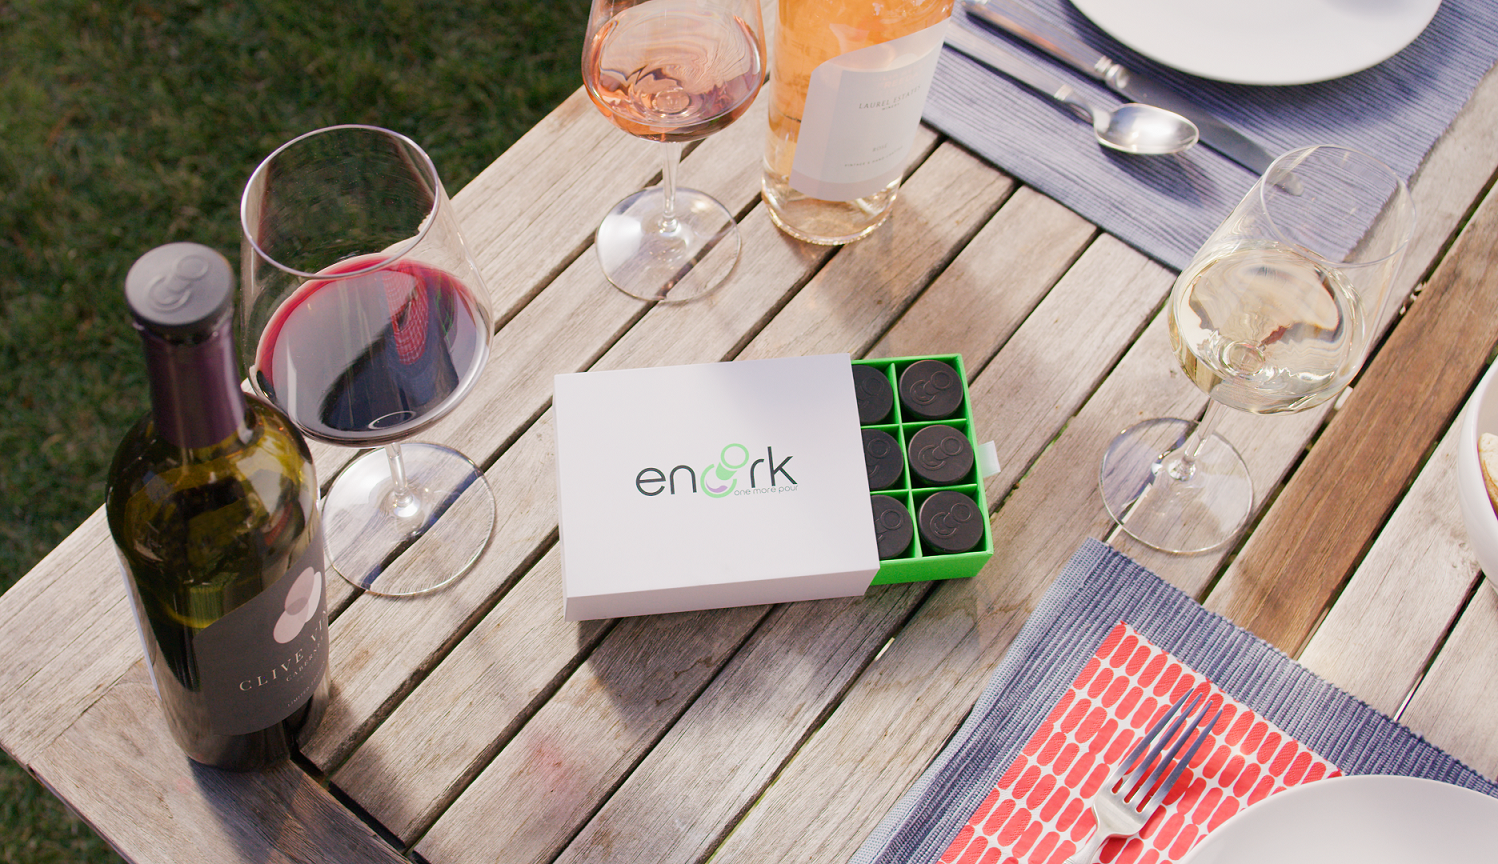 Encork wine-saving bottle stoppers absorb 99.9% of oxygen with food-safe compounds so your wine never goes bad.